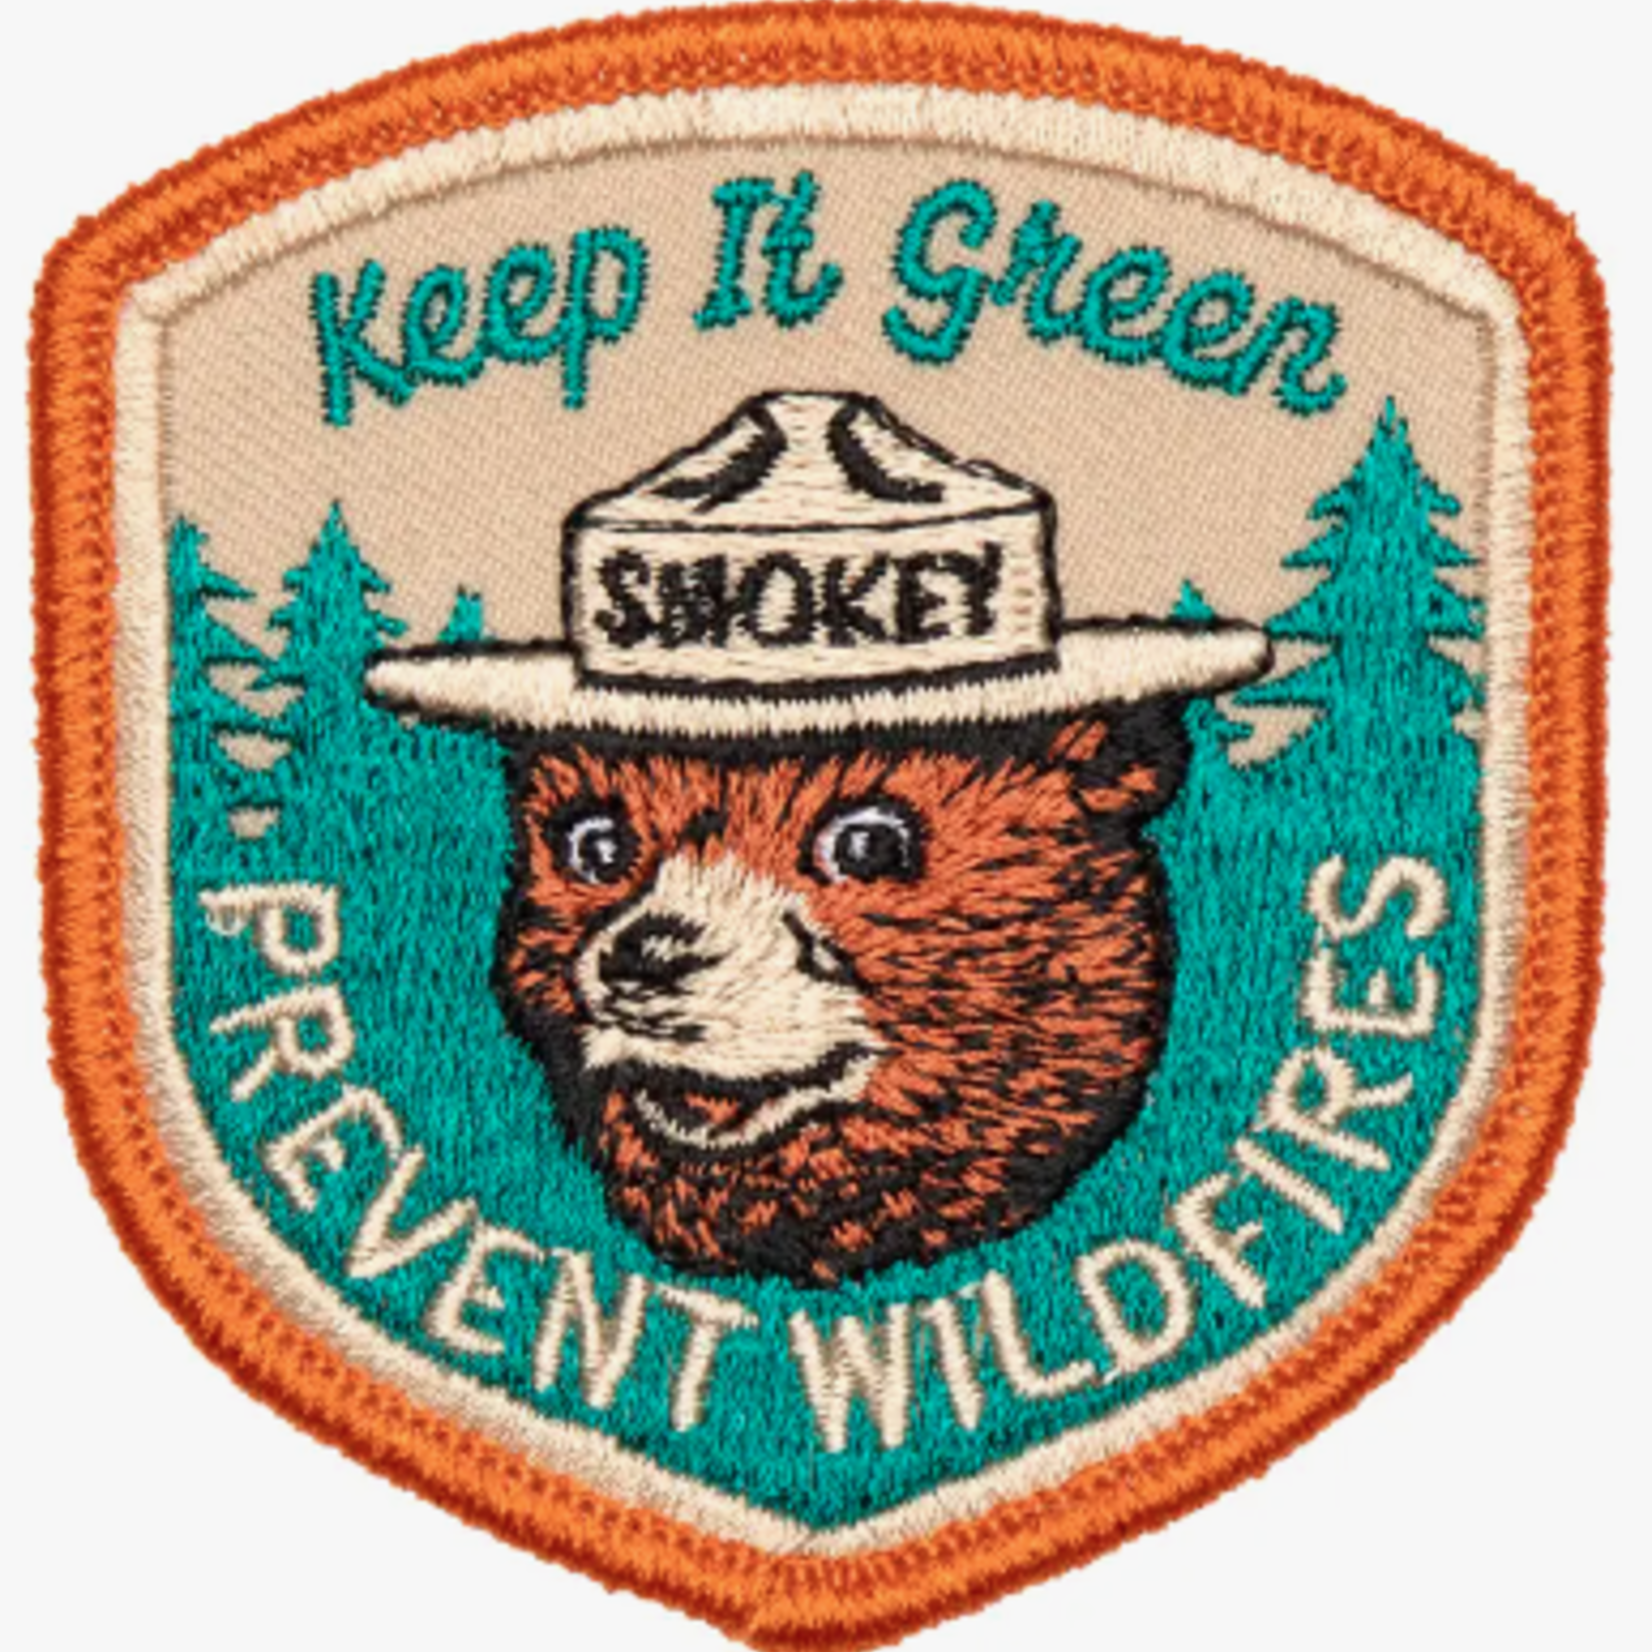 Patches Smokey Keep It Green Patch